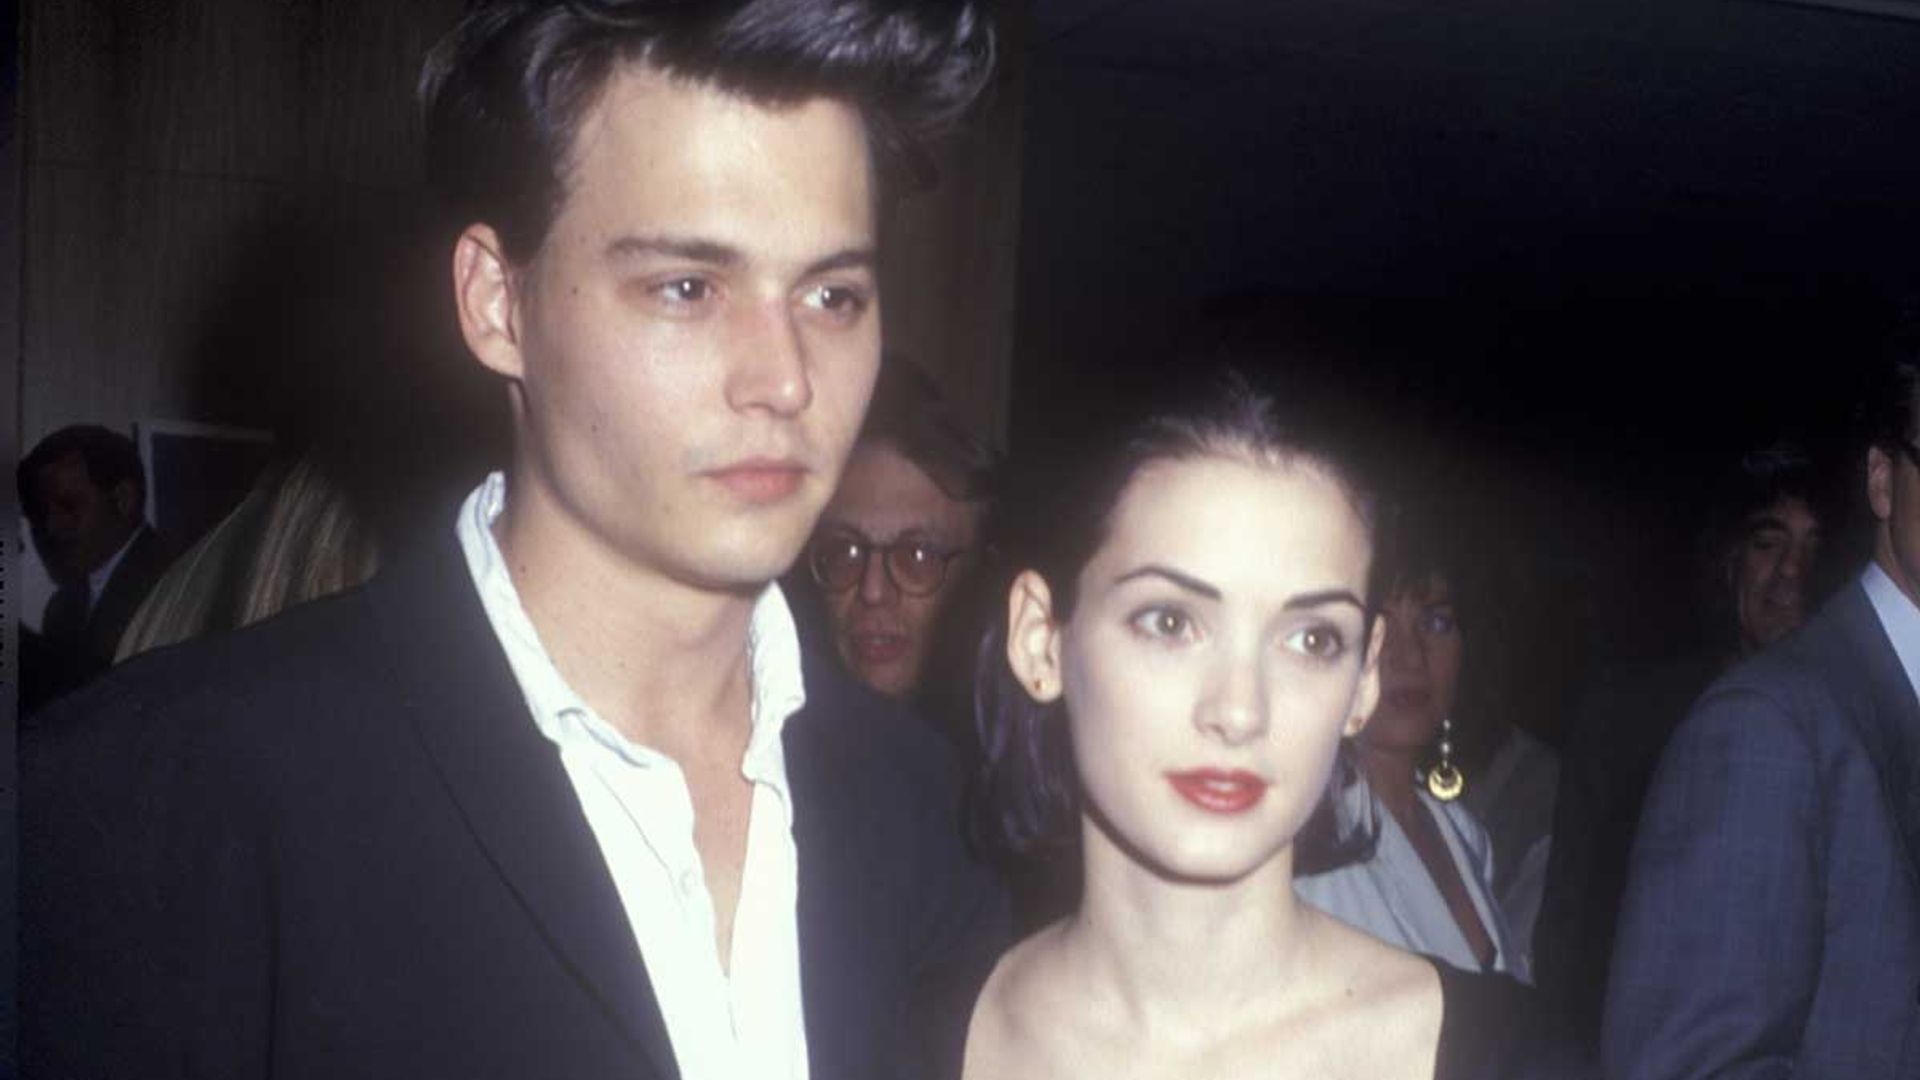 Winona Ryder Makes Heartbreaking Admission About Her Health After Johnny Depp Split Hello 9565